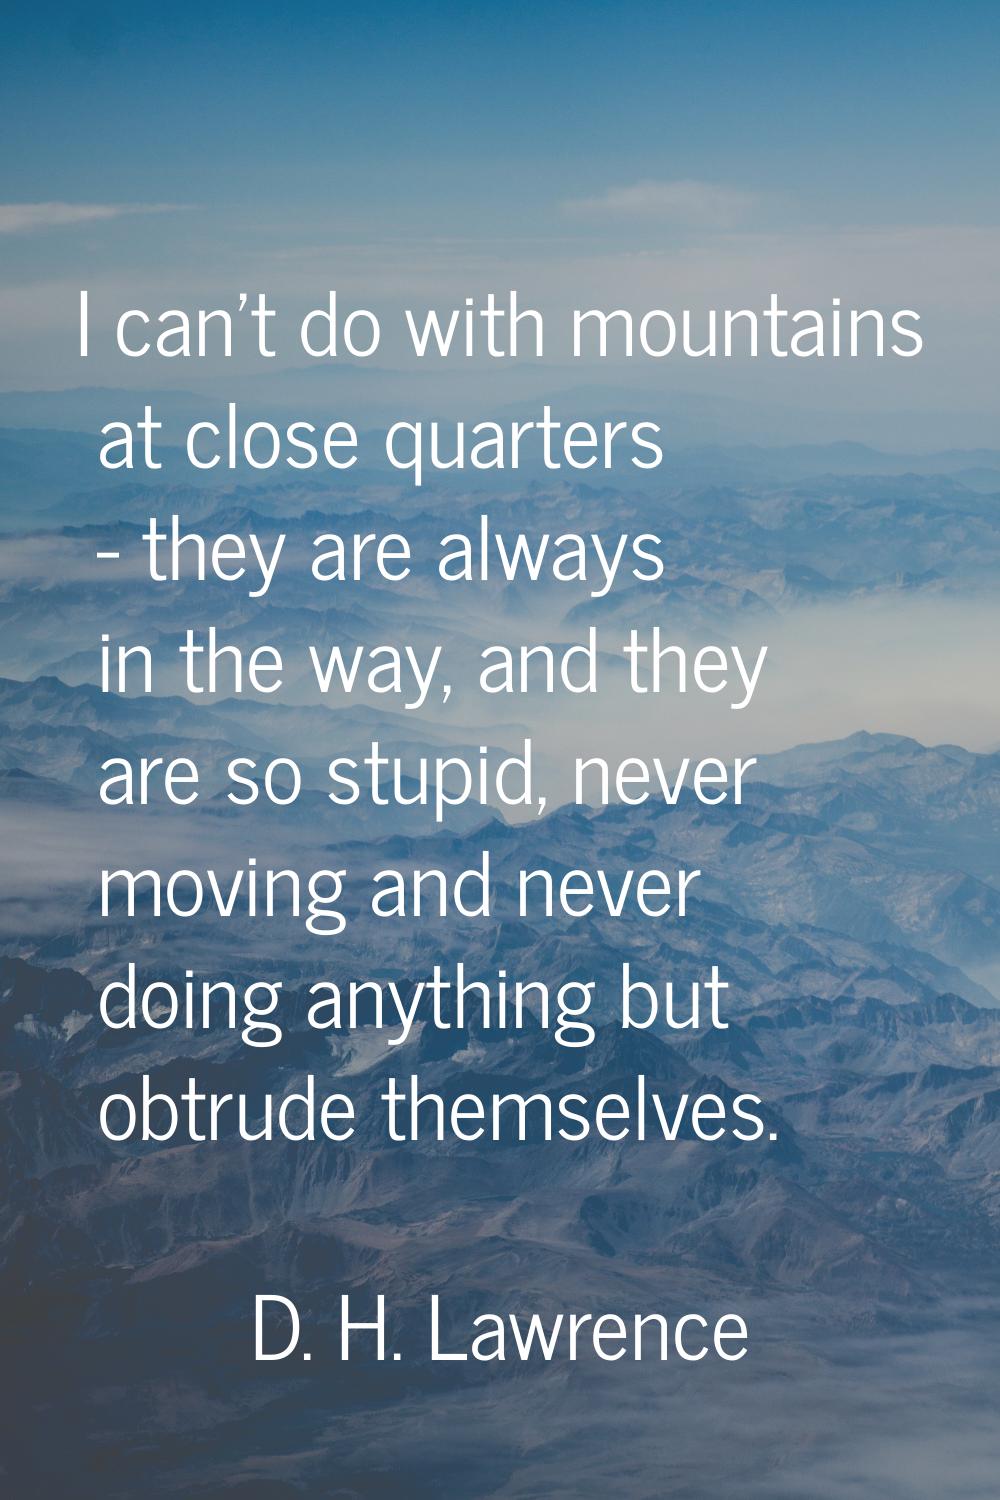 I can't do with mountains at close quarters - they are always in the way, and they are so stupid, n